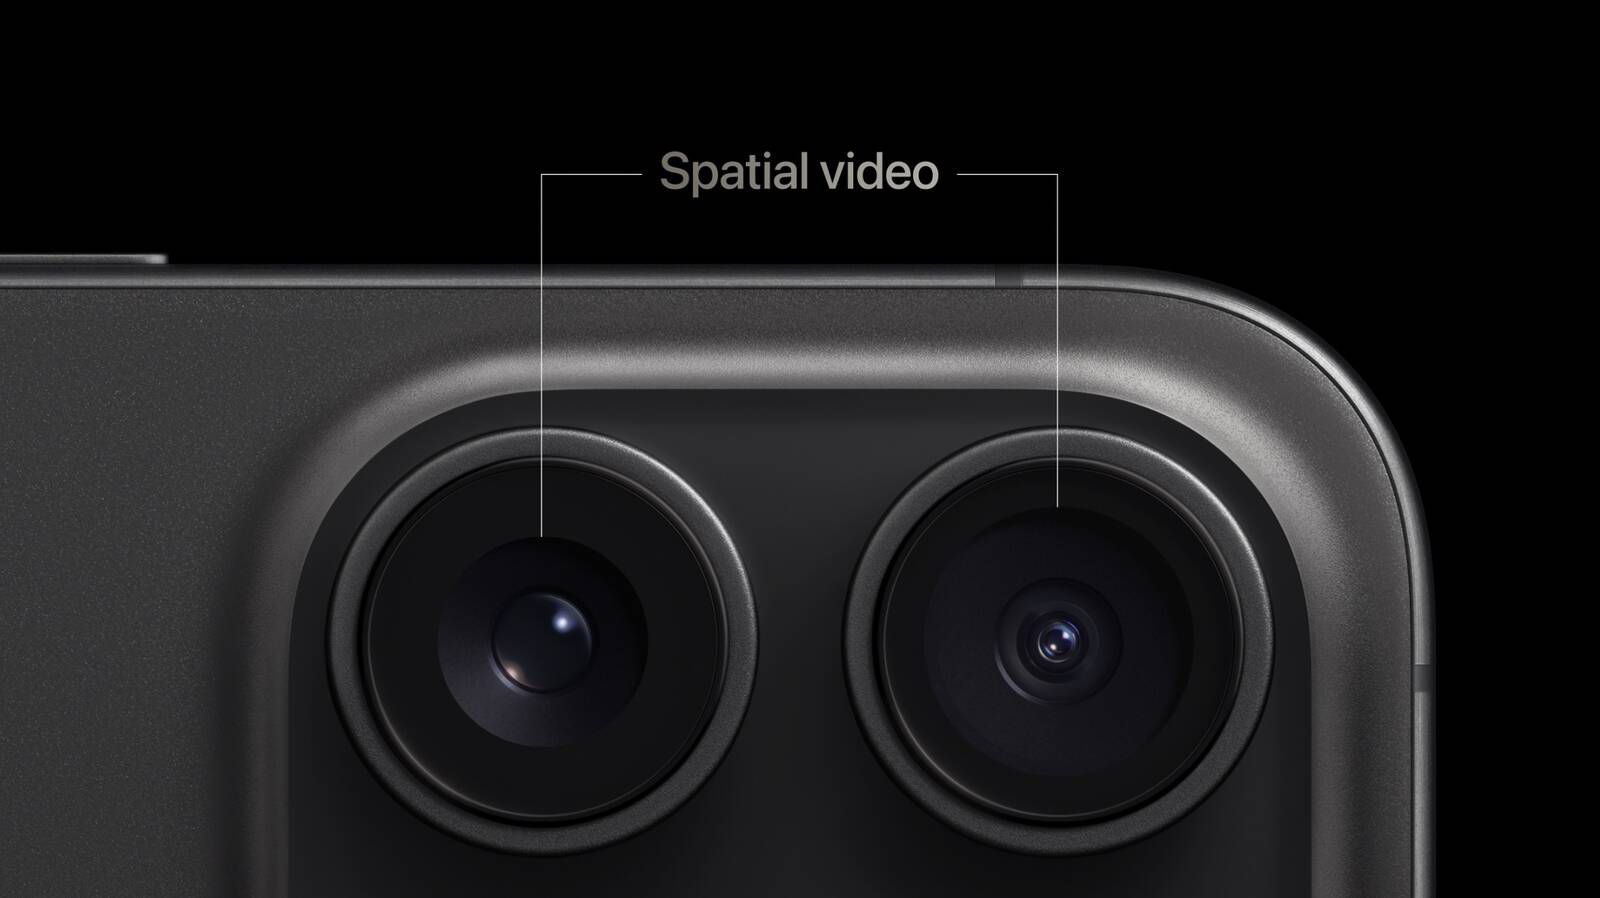 iPhone 15 Pro Cameras to Support Spatial Video Later This Year, But Key Questions Remain